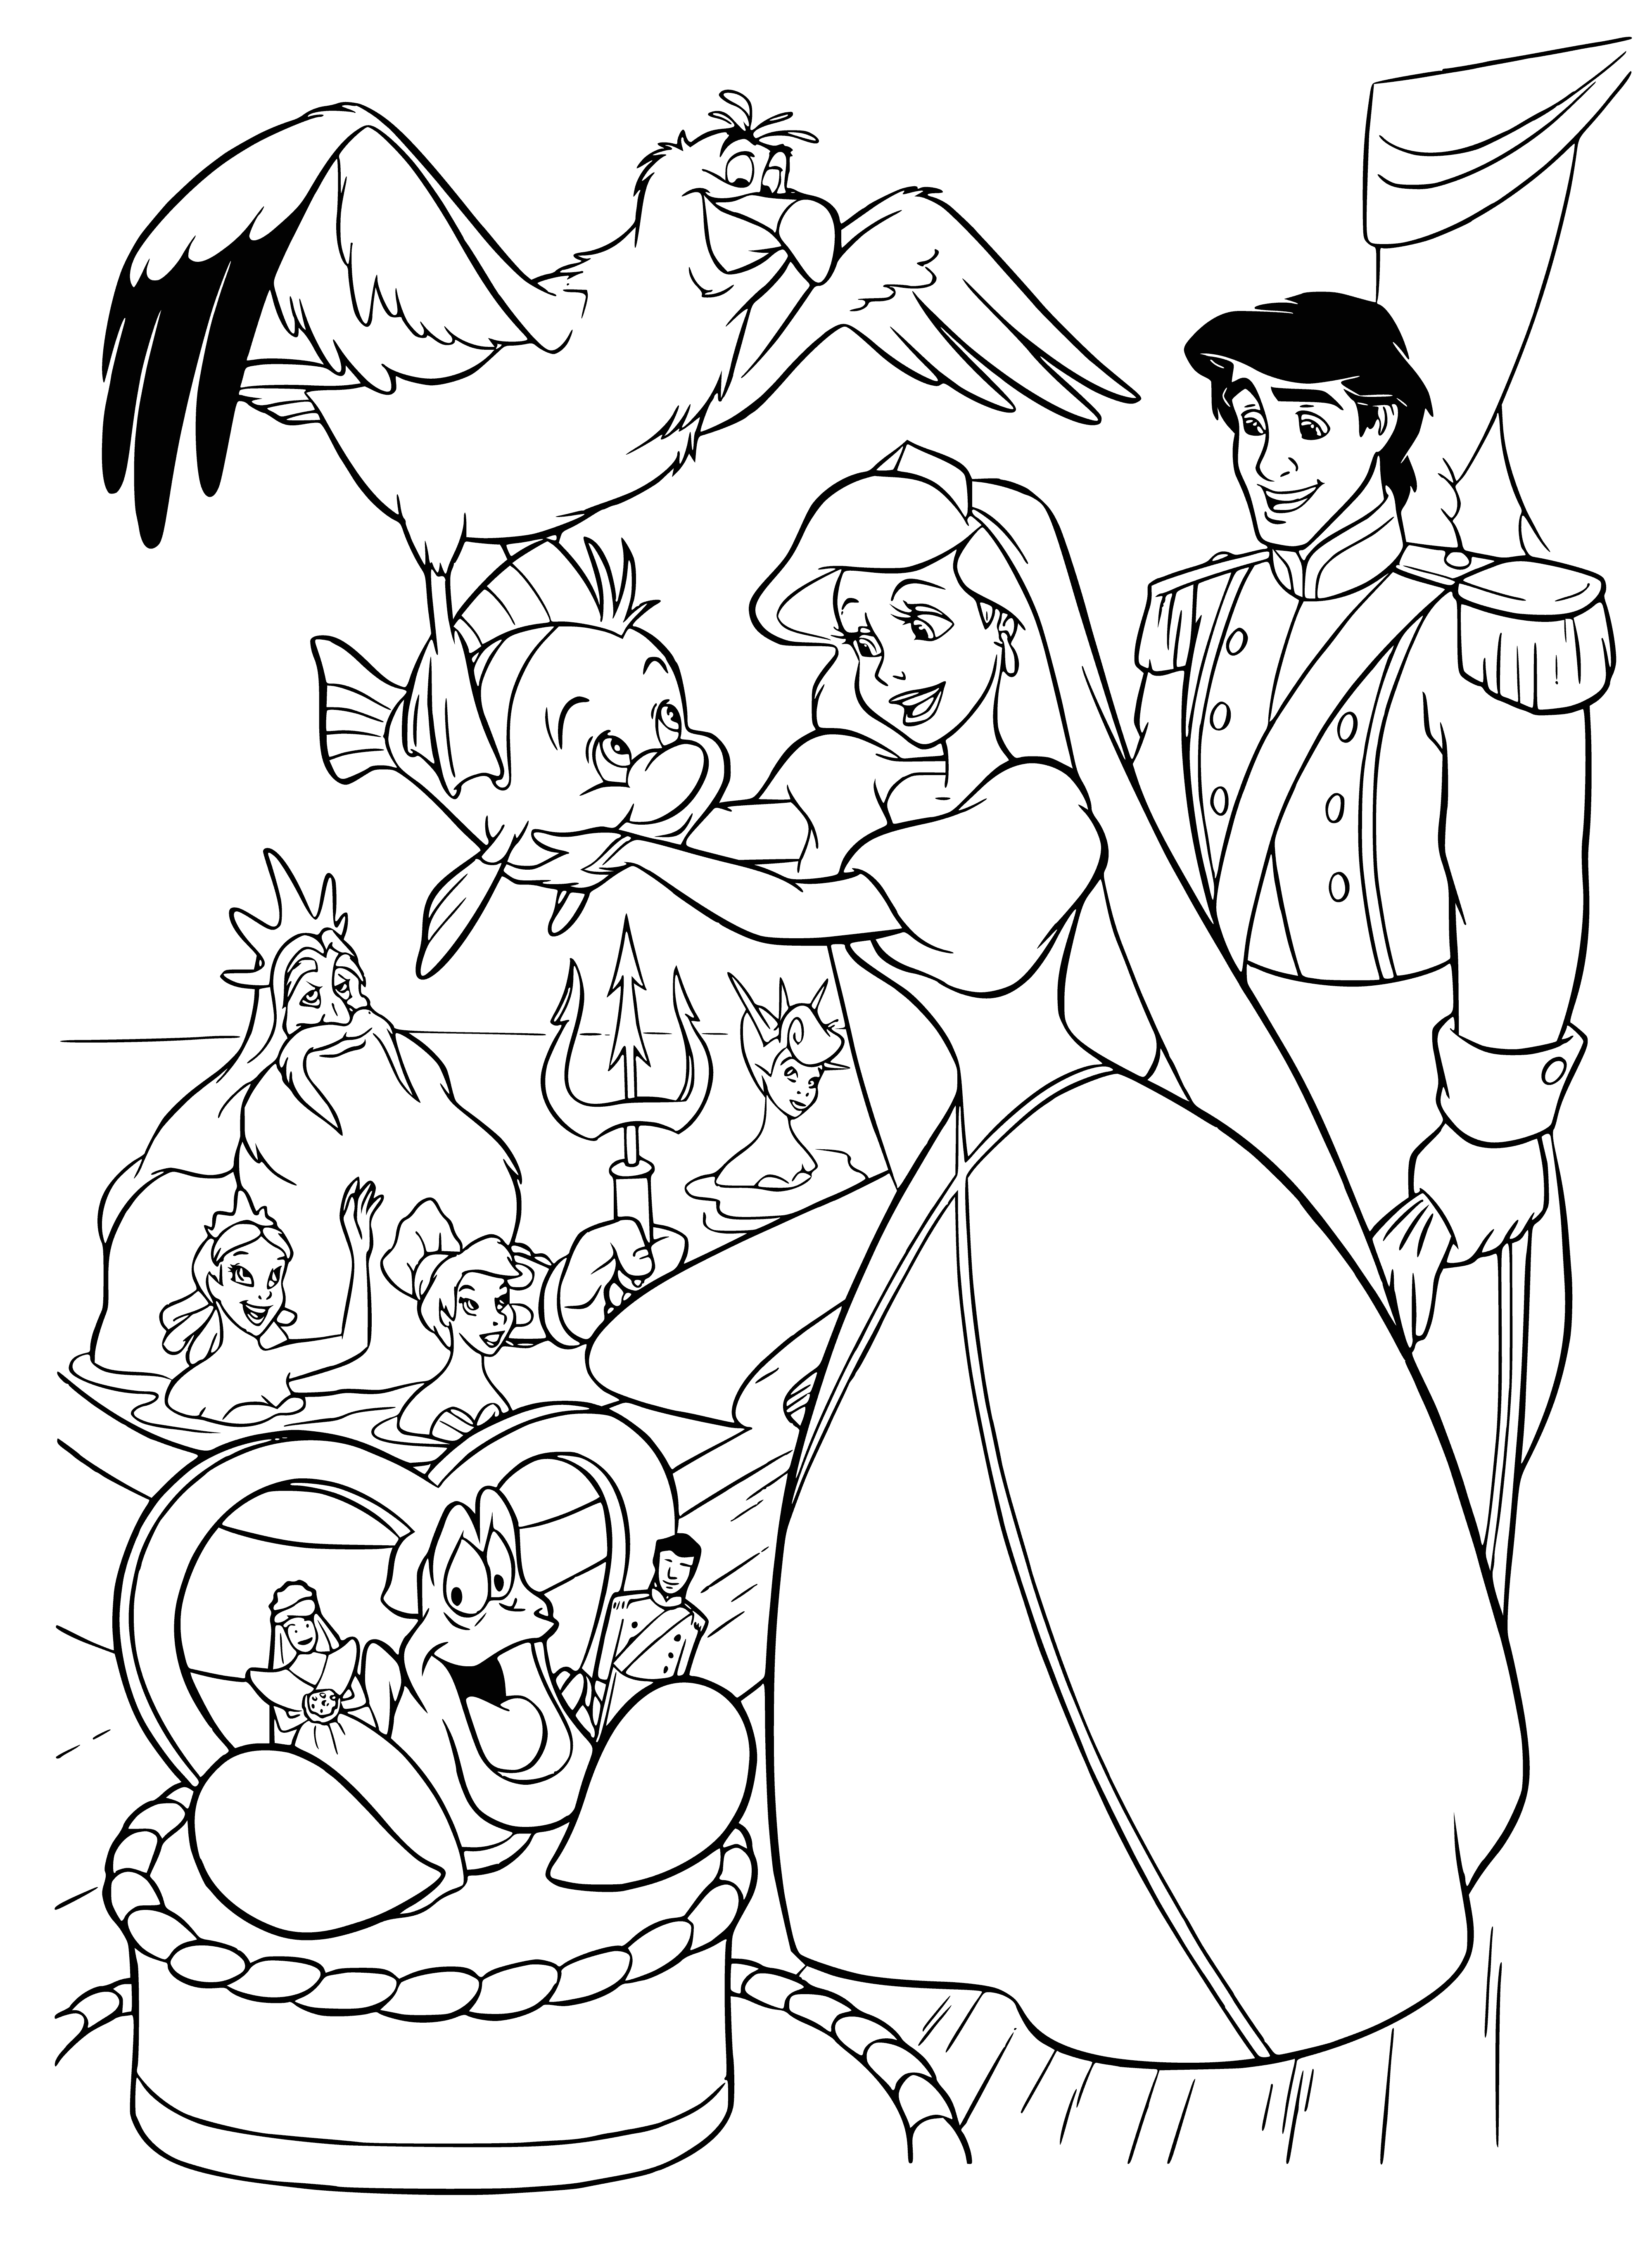 coloring page: Prince & Mermaid get married; white dress & black tux, witnessed by minister & 2 others. Looks romantic & elegant.